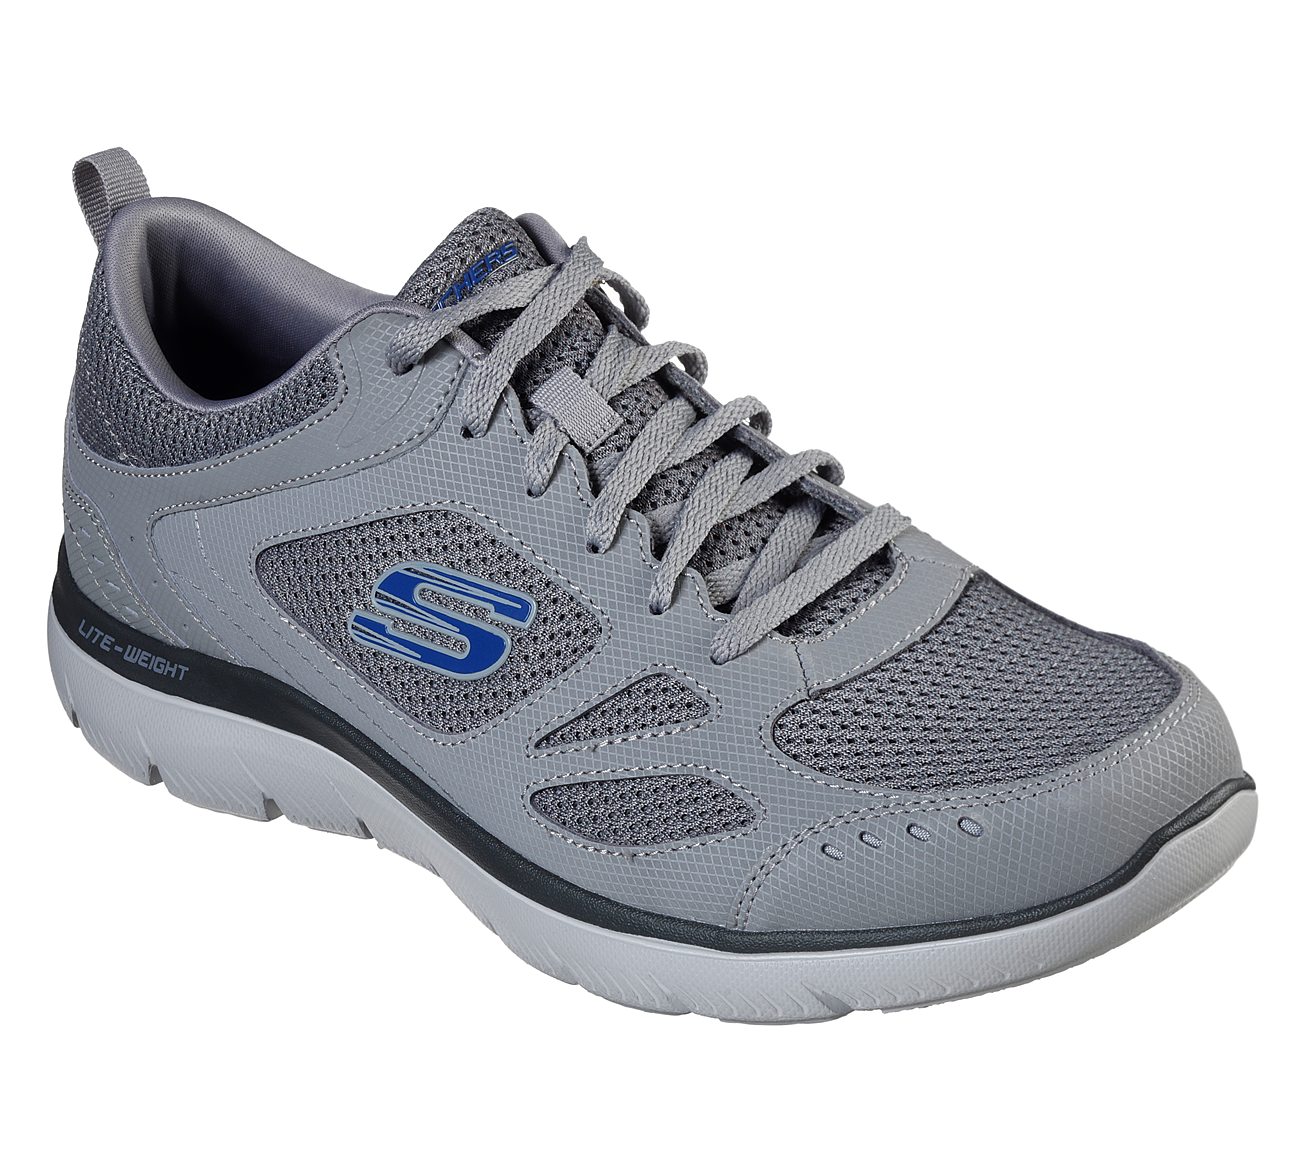 skechers south common off 75% - online 